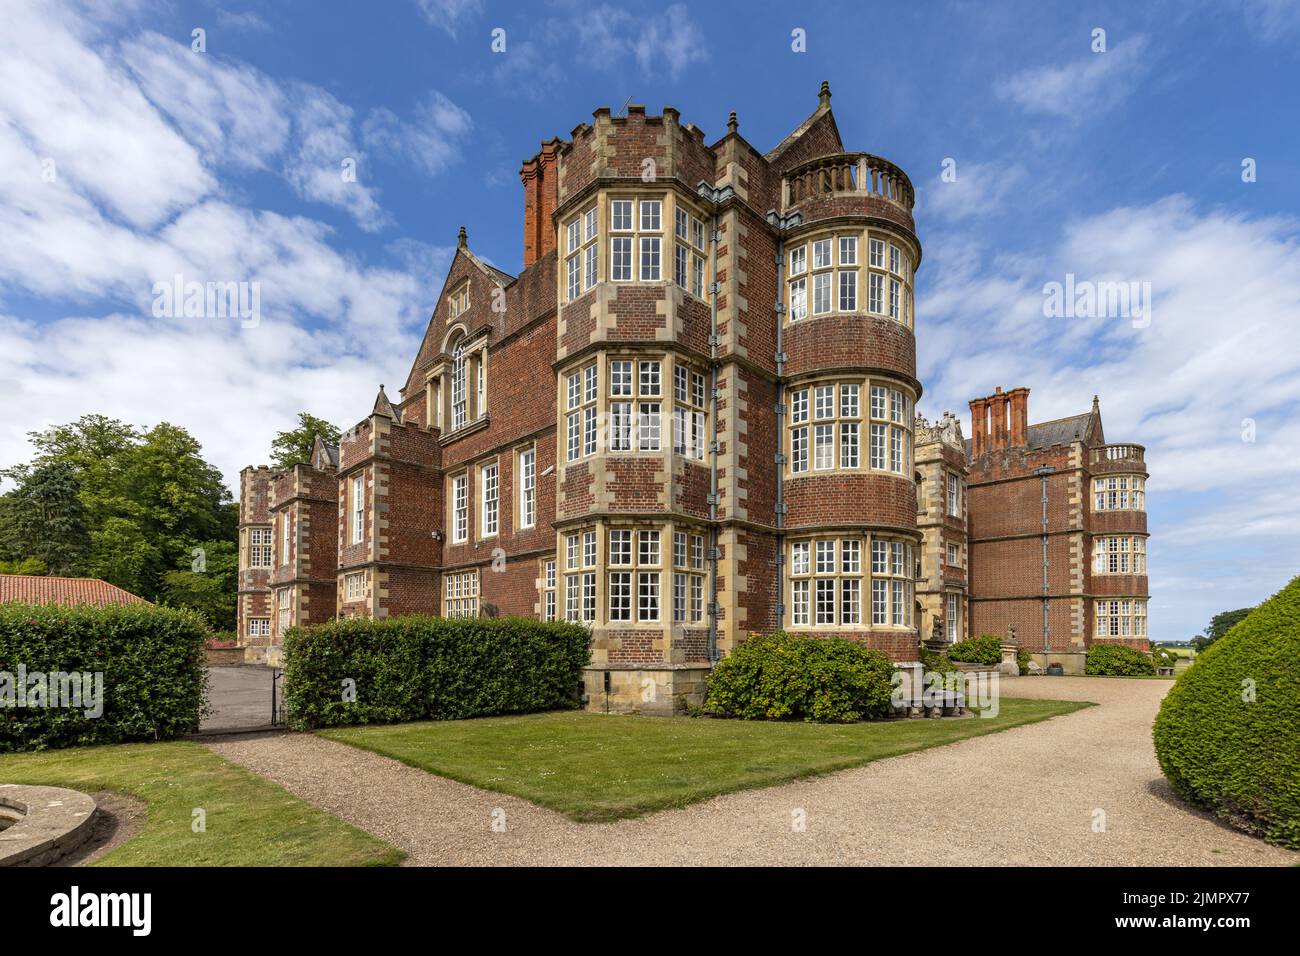 Burton Agnes Hall, a superb 17th century Elizabethan manor house in the East Riding of Yorkshire, England, Uk Stock Photo